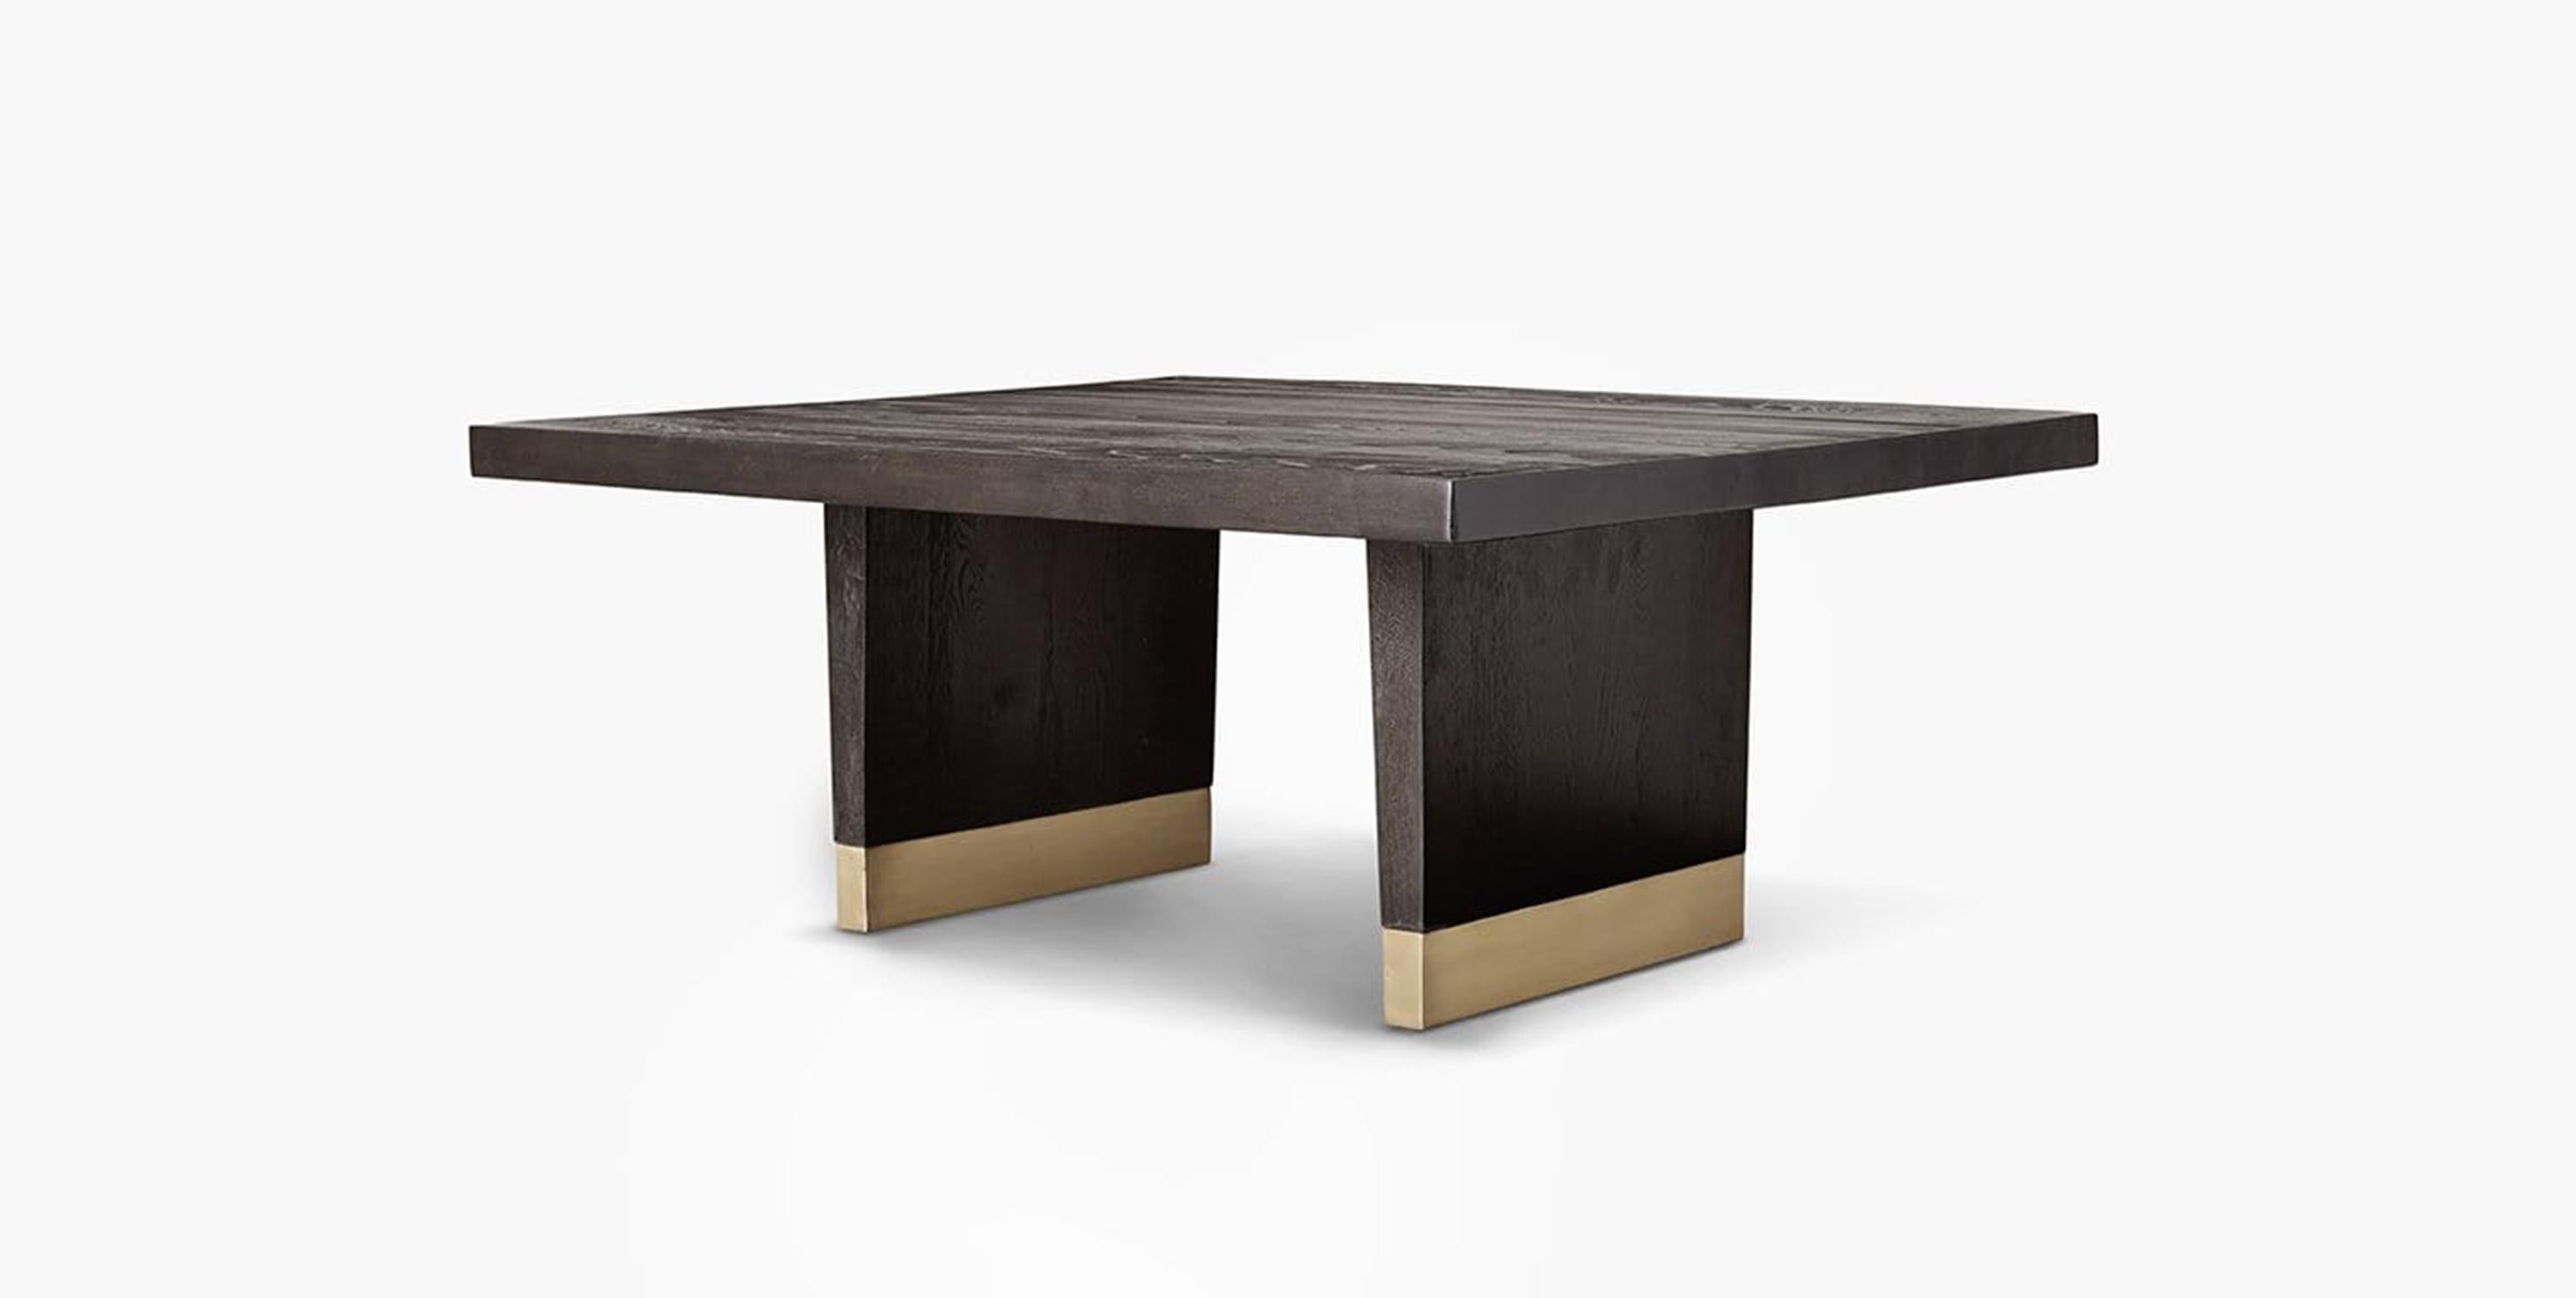 Our Arche Coffee Table features a hardwood frame and paneled legs with a brass base for added texture and dimension for your living room. Our handcrafted finishes are inspired by variations within natural textures. Each selection is slightly unique.